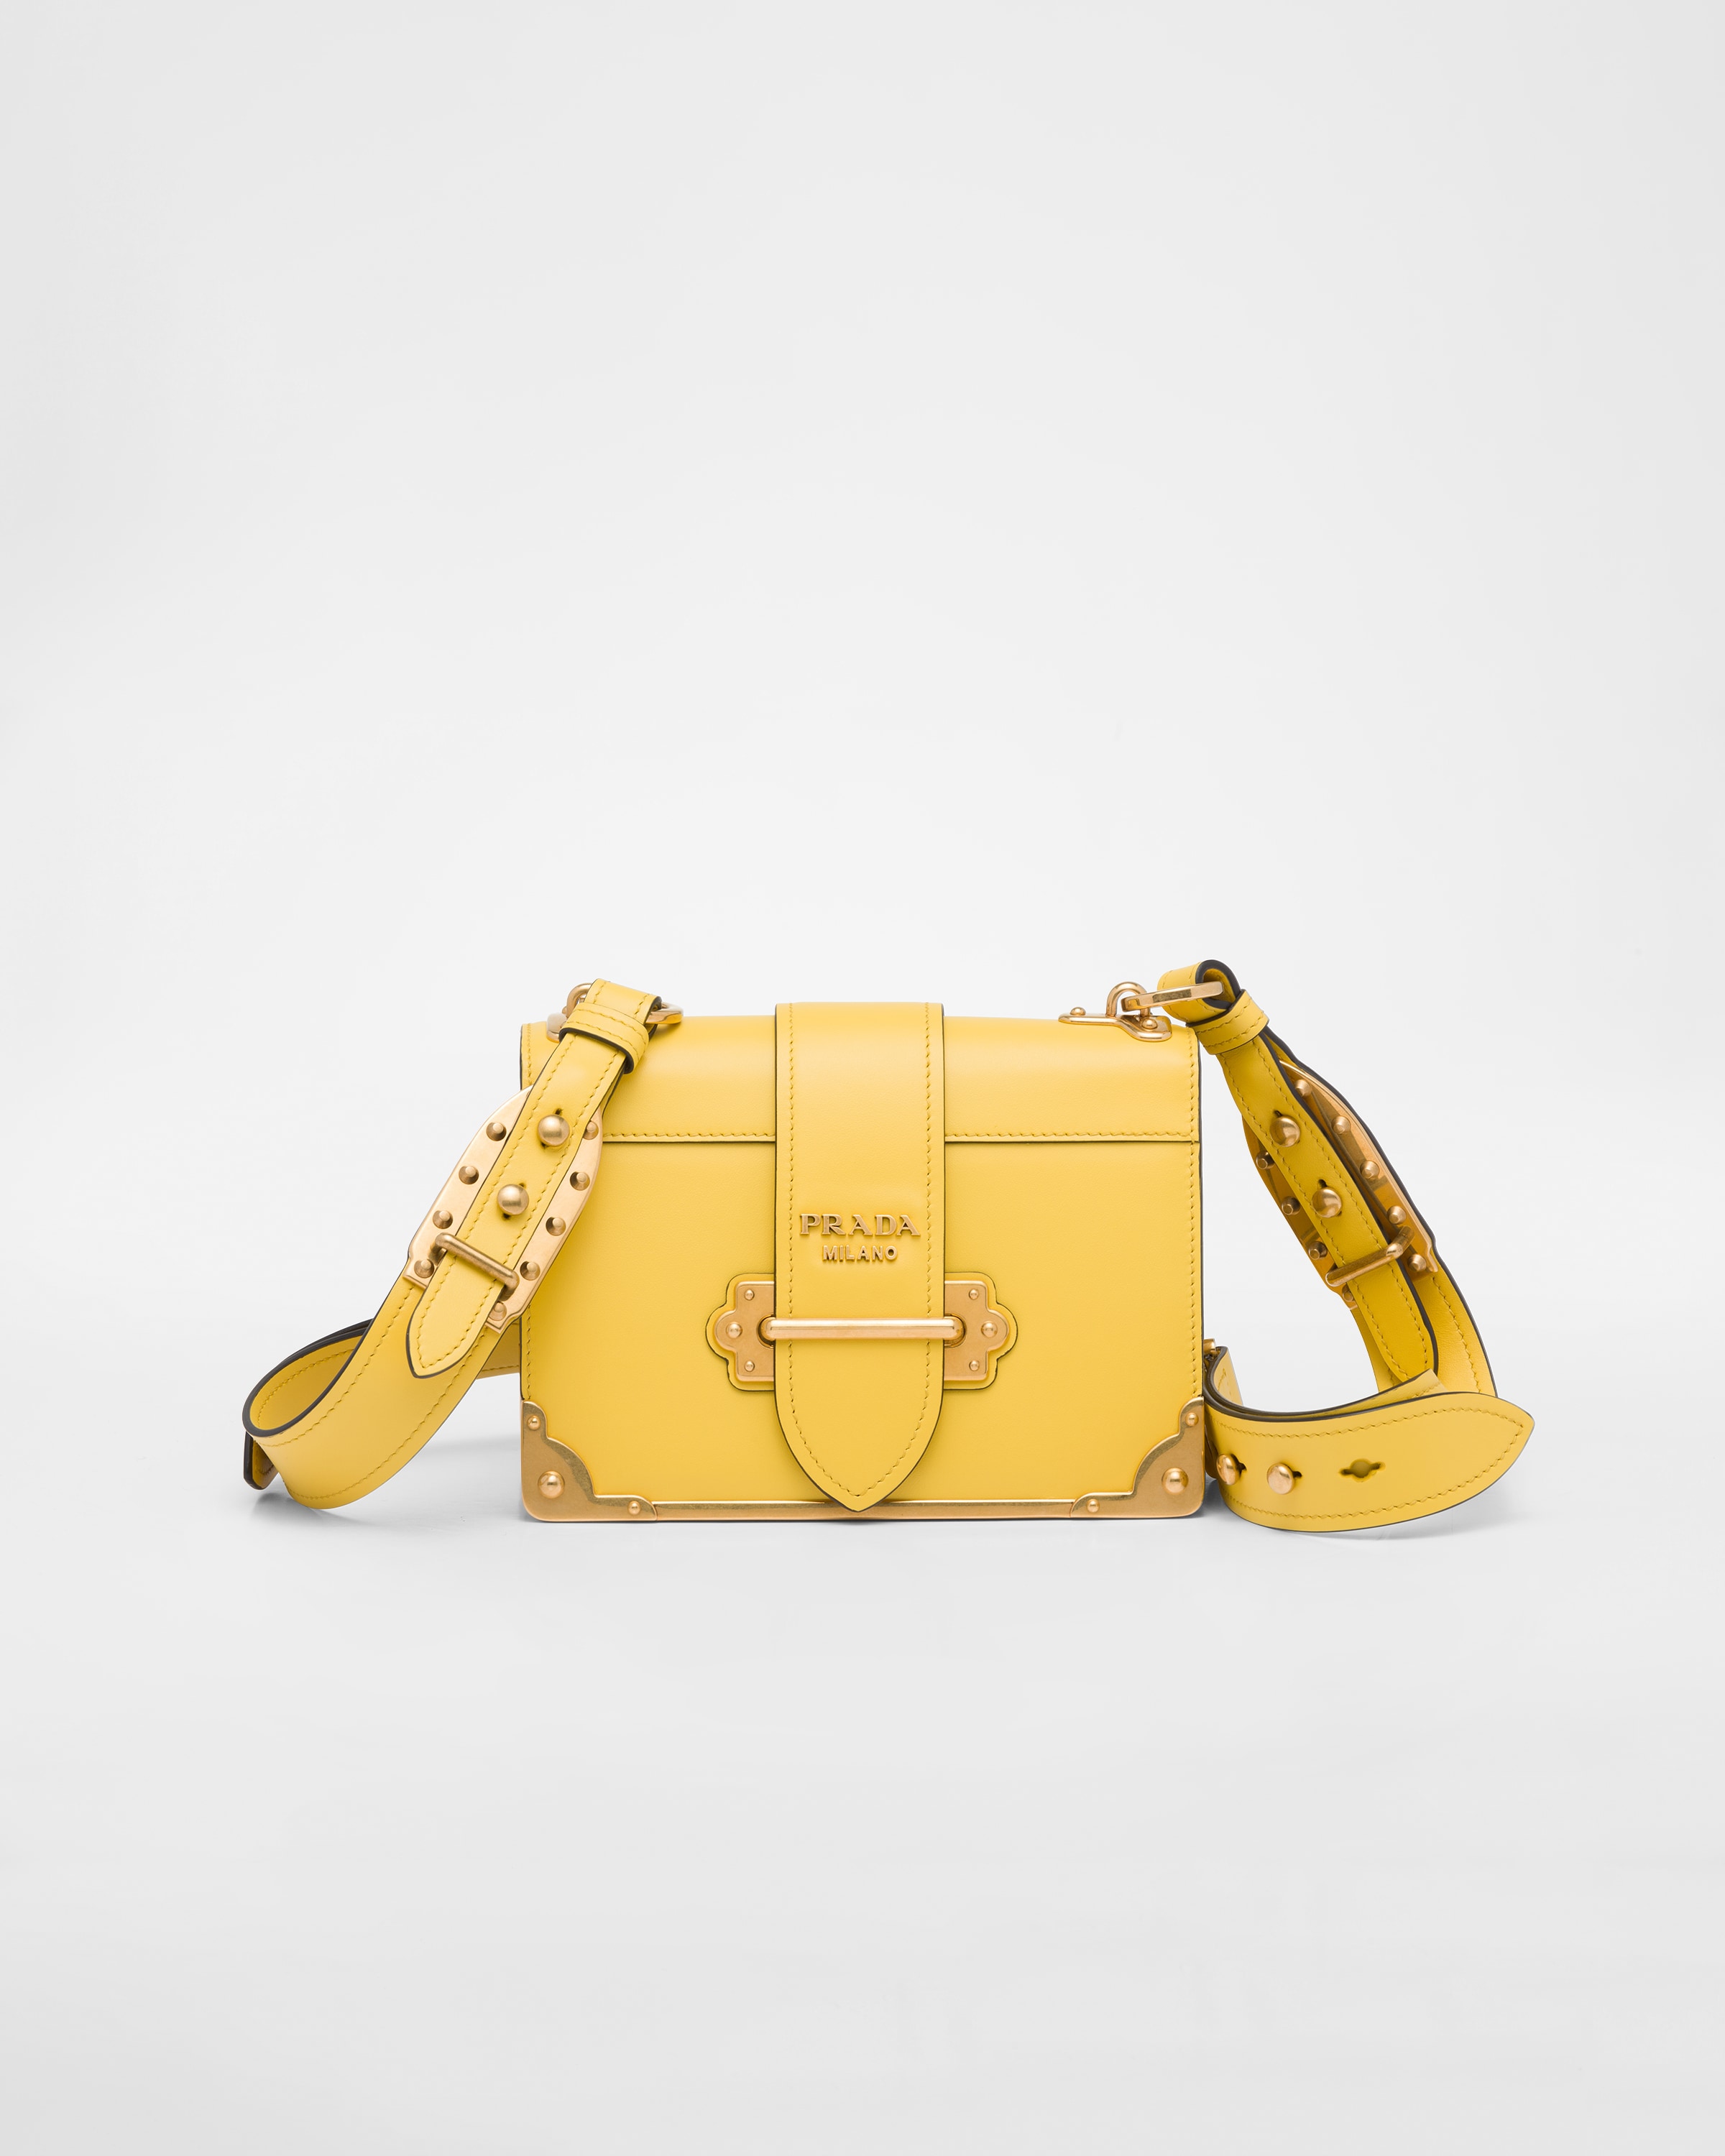 Introducing the Prada Corsaire Bag, a New Versatile Must-Have